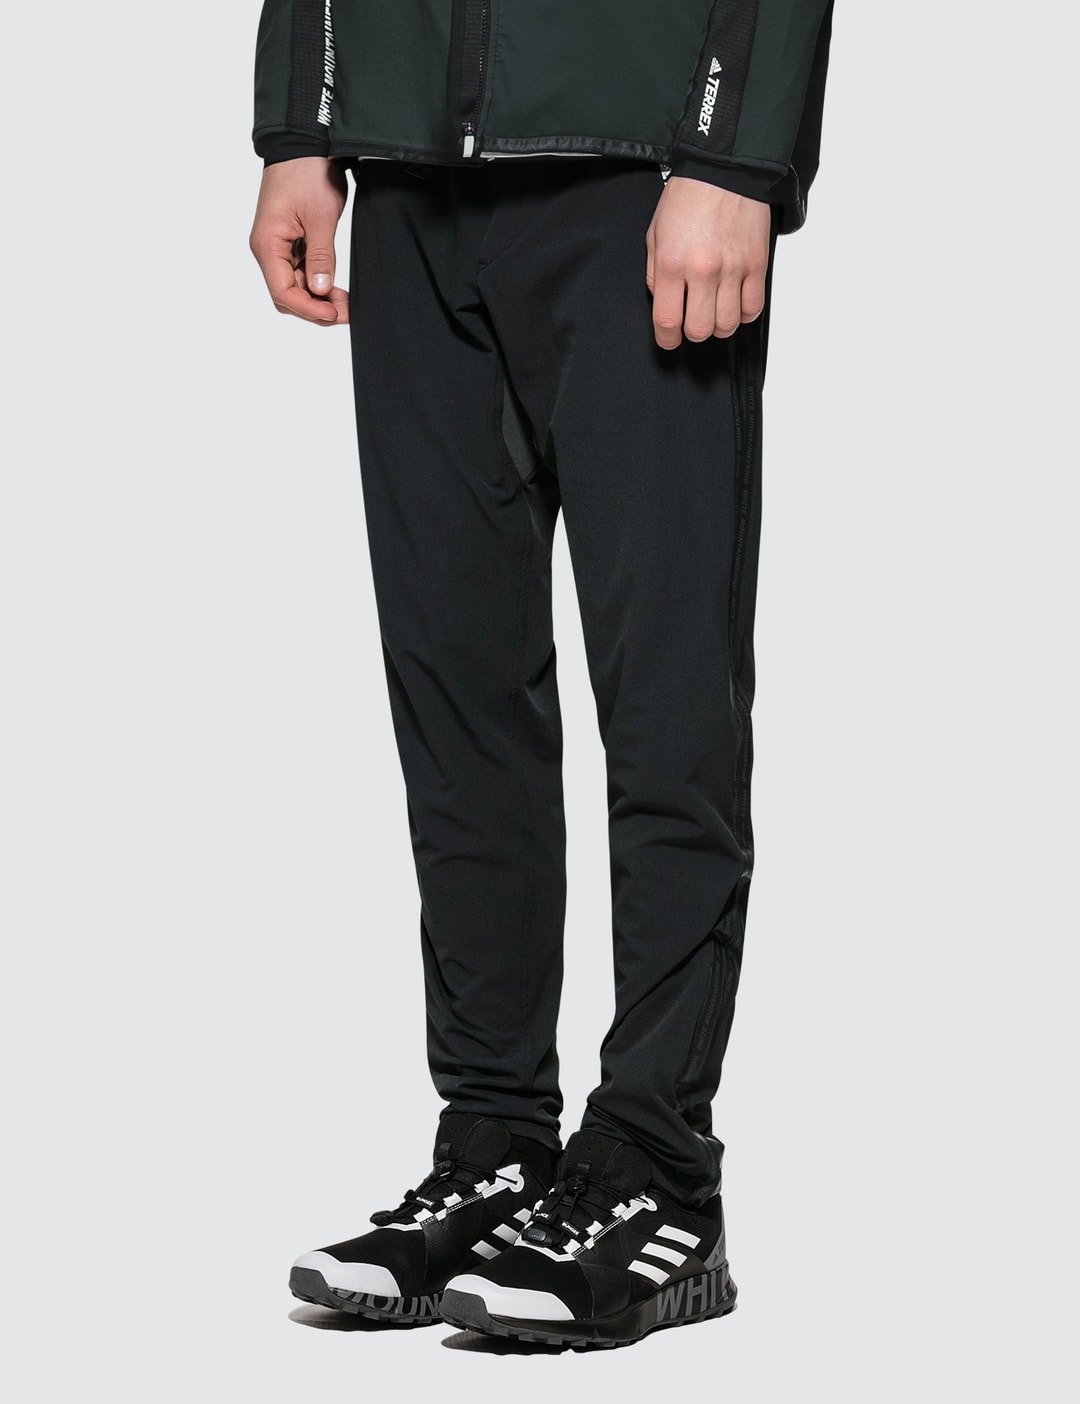 mover Permanent Indskrive Adidas Originals - White Mountaineering x Adidas Slim Pants | HBX -  Globally Curated Fashion and Lifestyle by Hypebeast